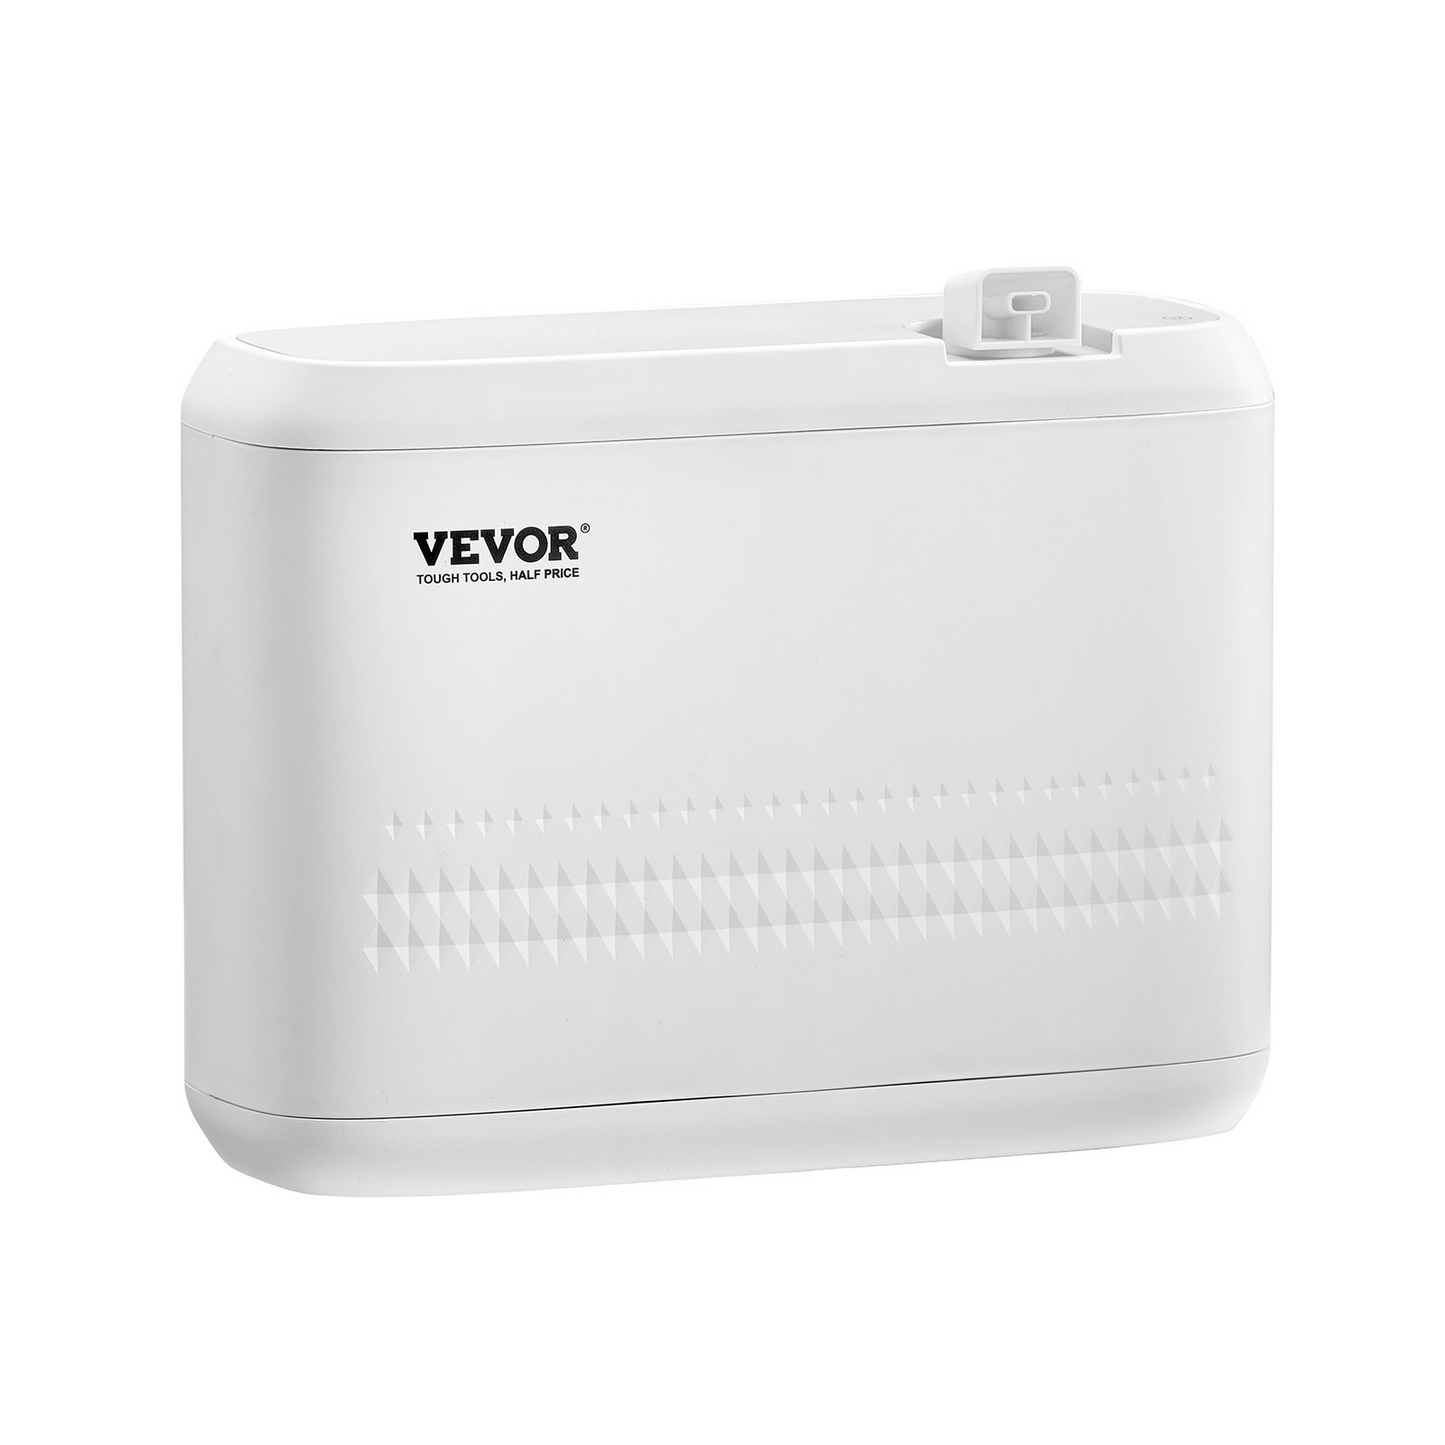 VEVOR Upgrade HVAC Scent Diffuser for Whole House, 850ML Scent Air Machine with Cold Air Technology, Waterless Essential Oil Diffuser, Cover Up to 5000 Sq.Ft for Large Room, Hotel, Spa, Office, Goodies N Stuff